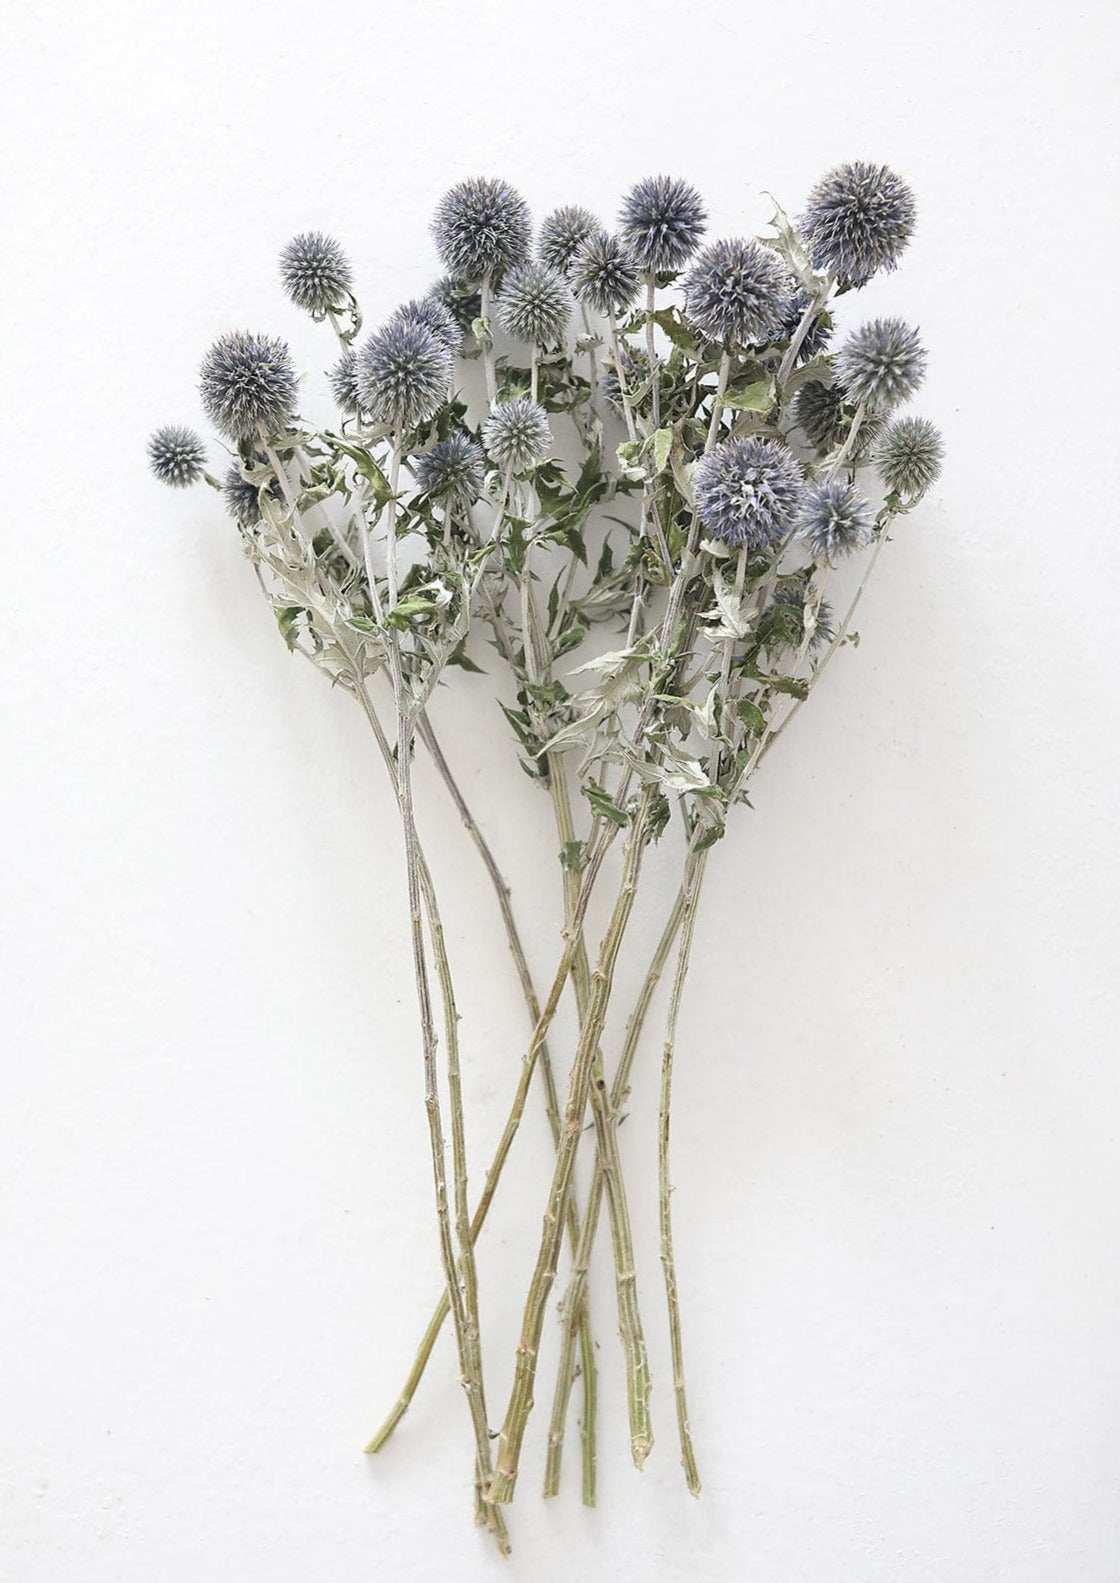 Echinops (Globe Thistle) - Dried Flowers Forever - DIY